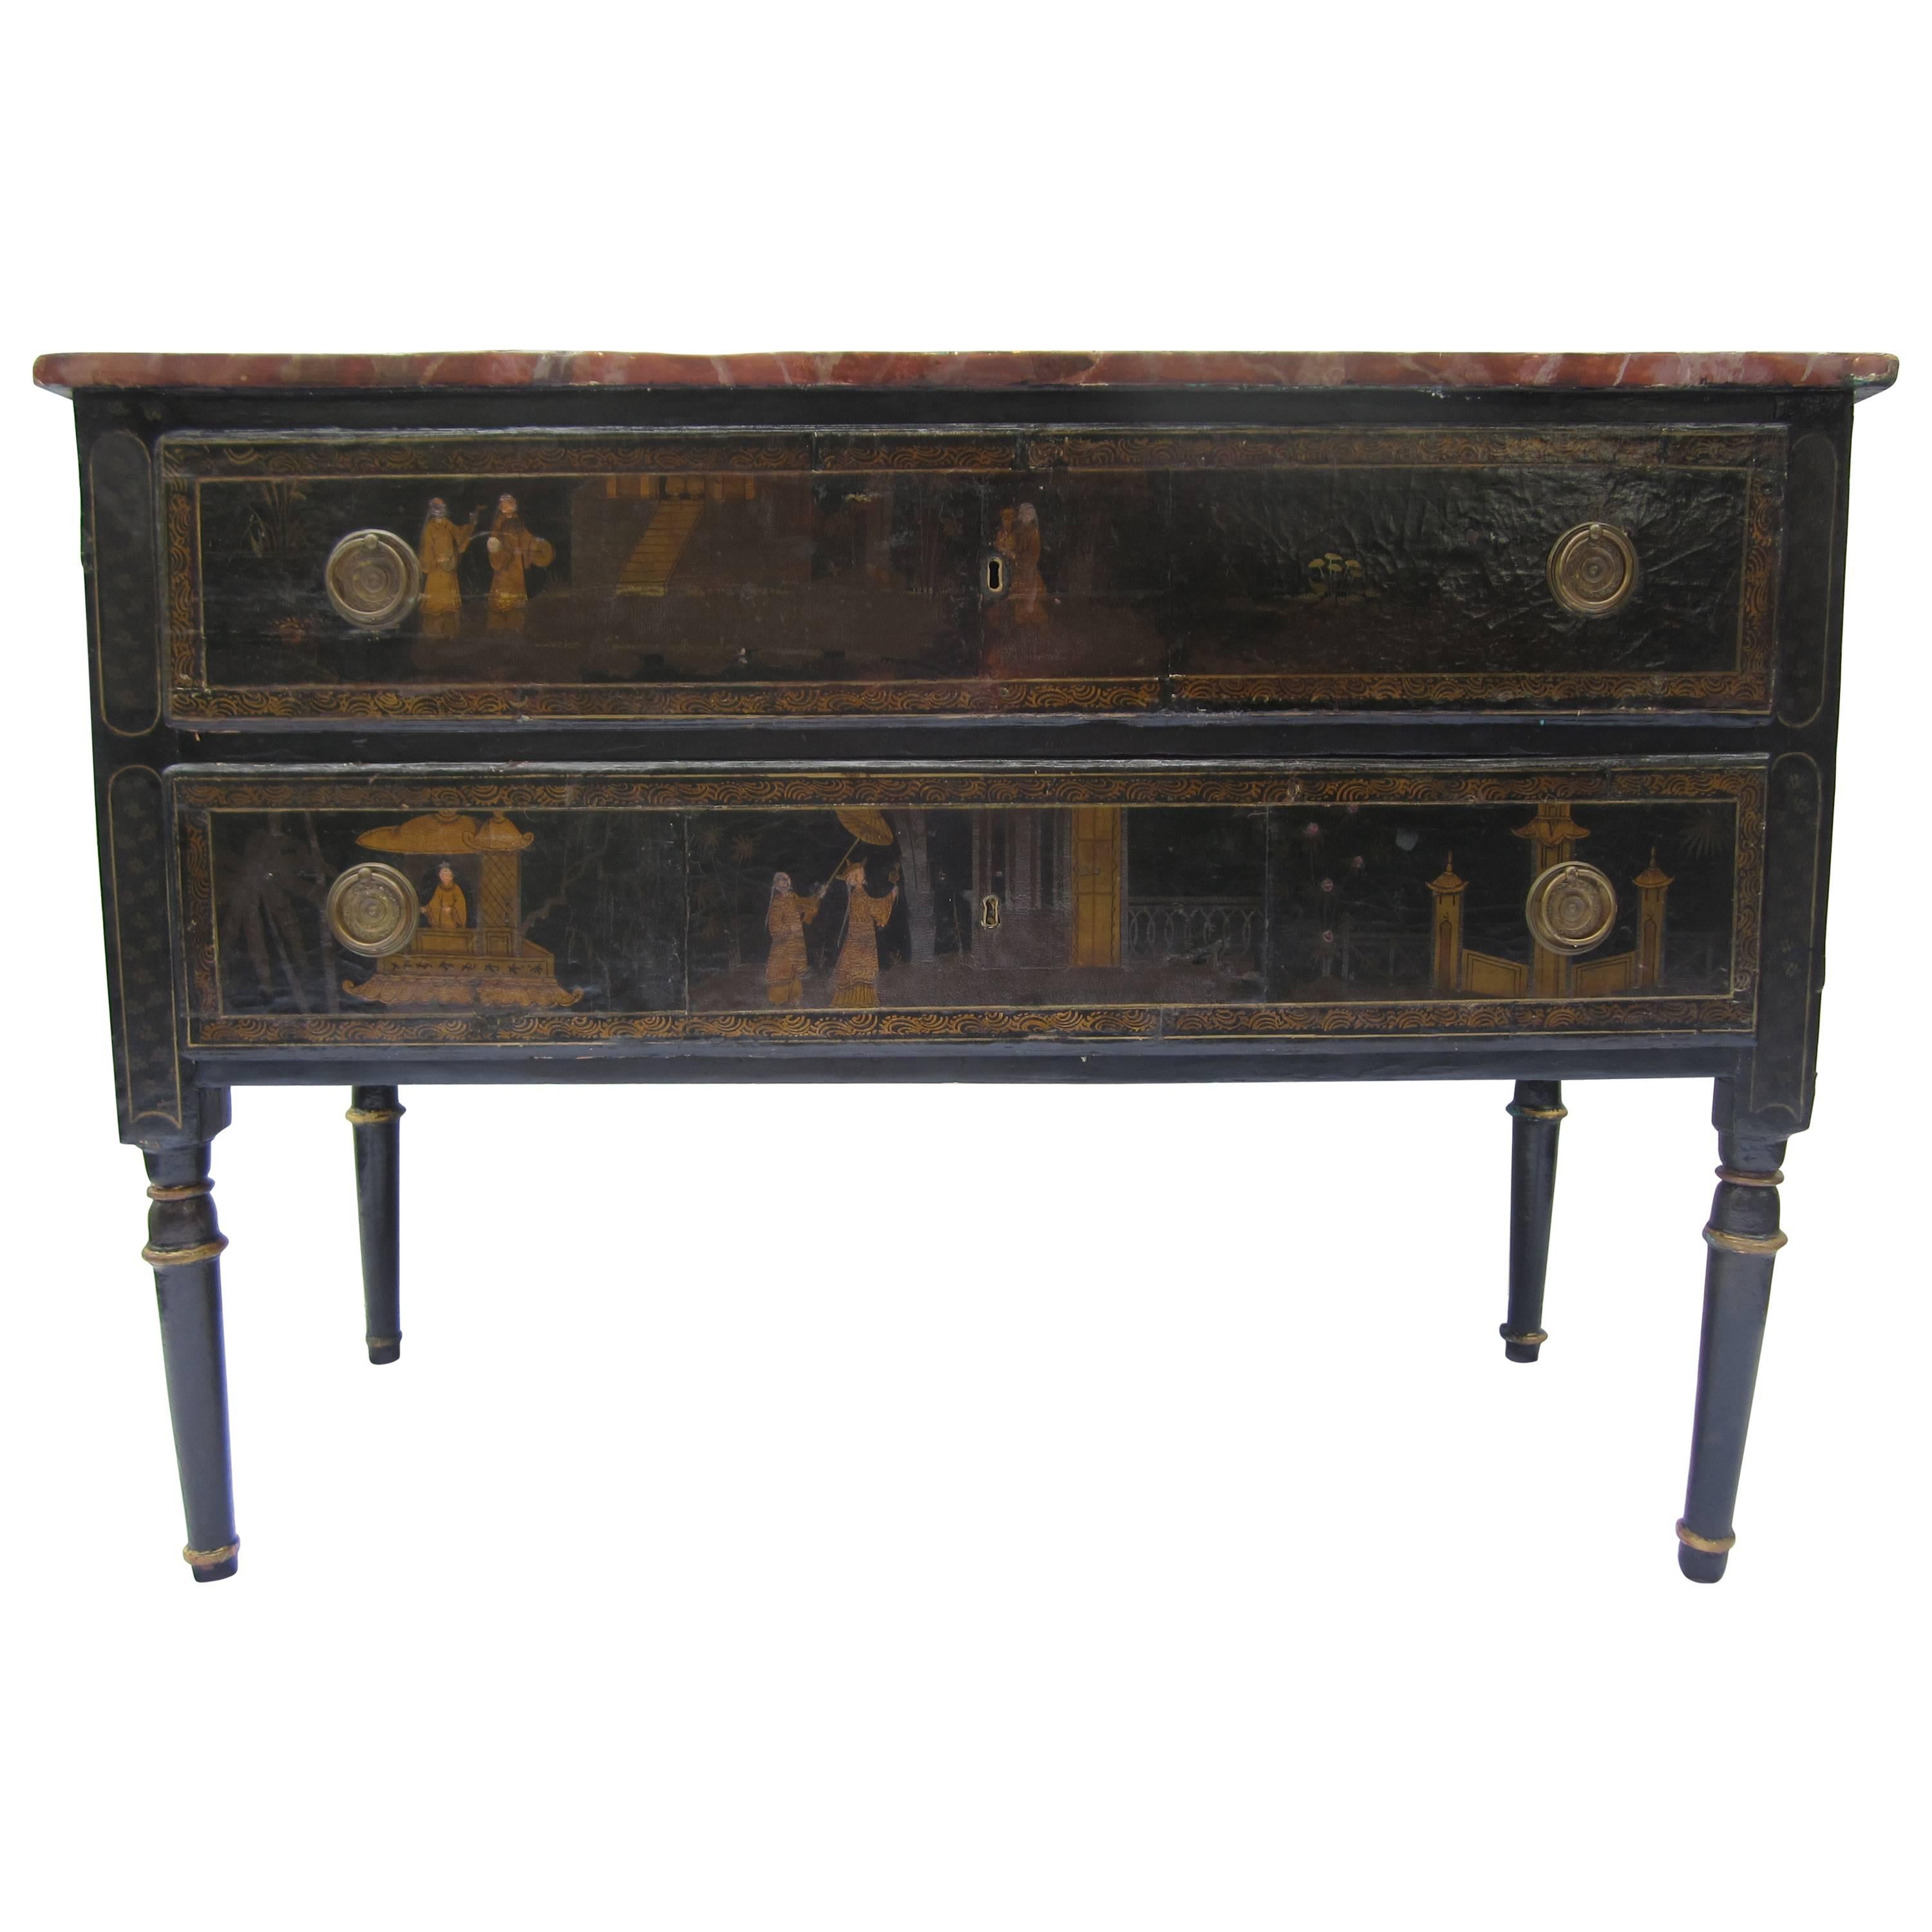 18th Century Chinoiserie Commode with Faux Marble Top